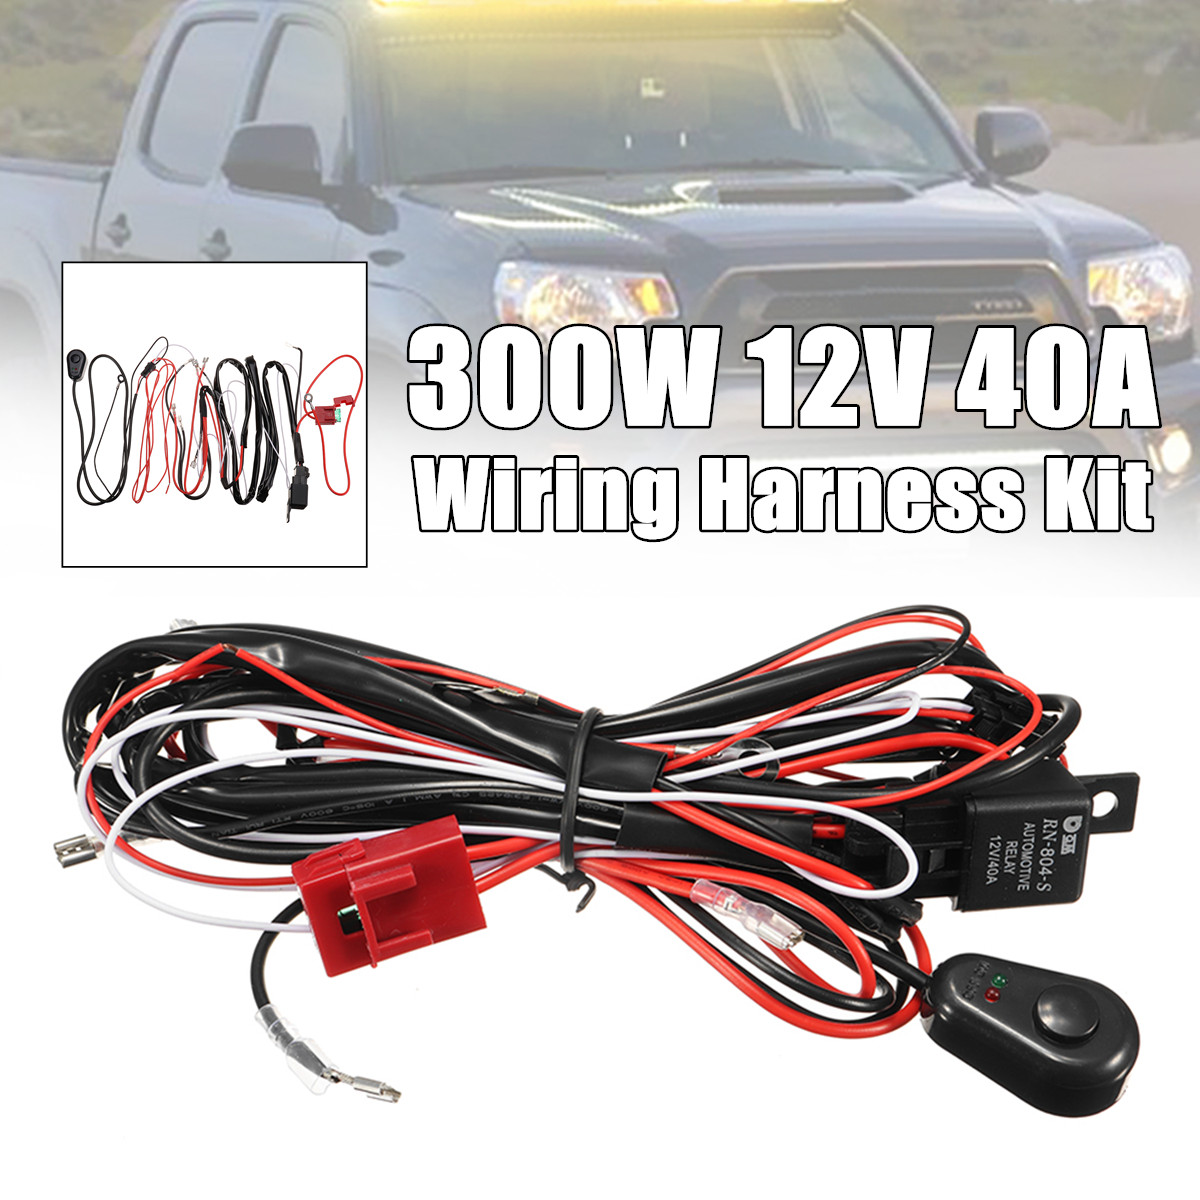 Wiring-Harness-Kit-12V-40A-300W-Fuse-Relay-OnOff-Switch-for-LED-Work-Fog-Light-Bar-1350401